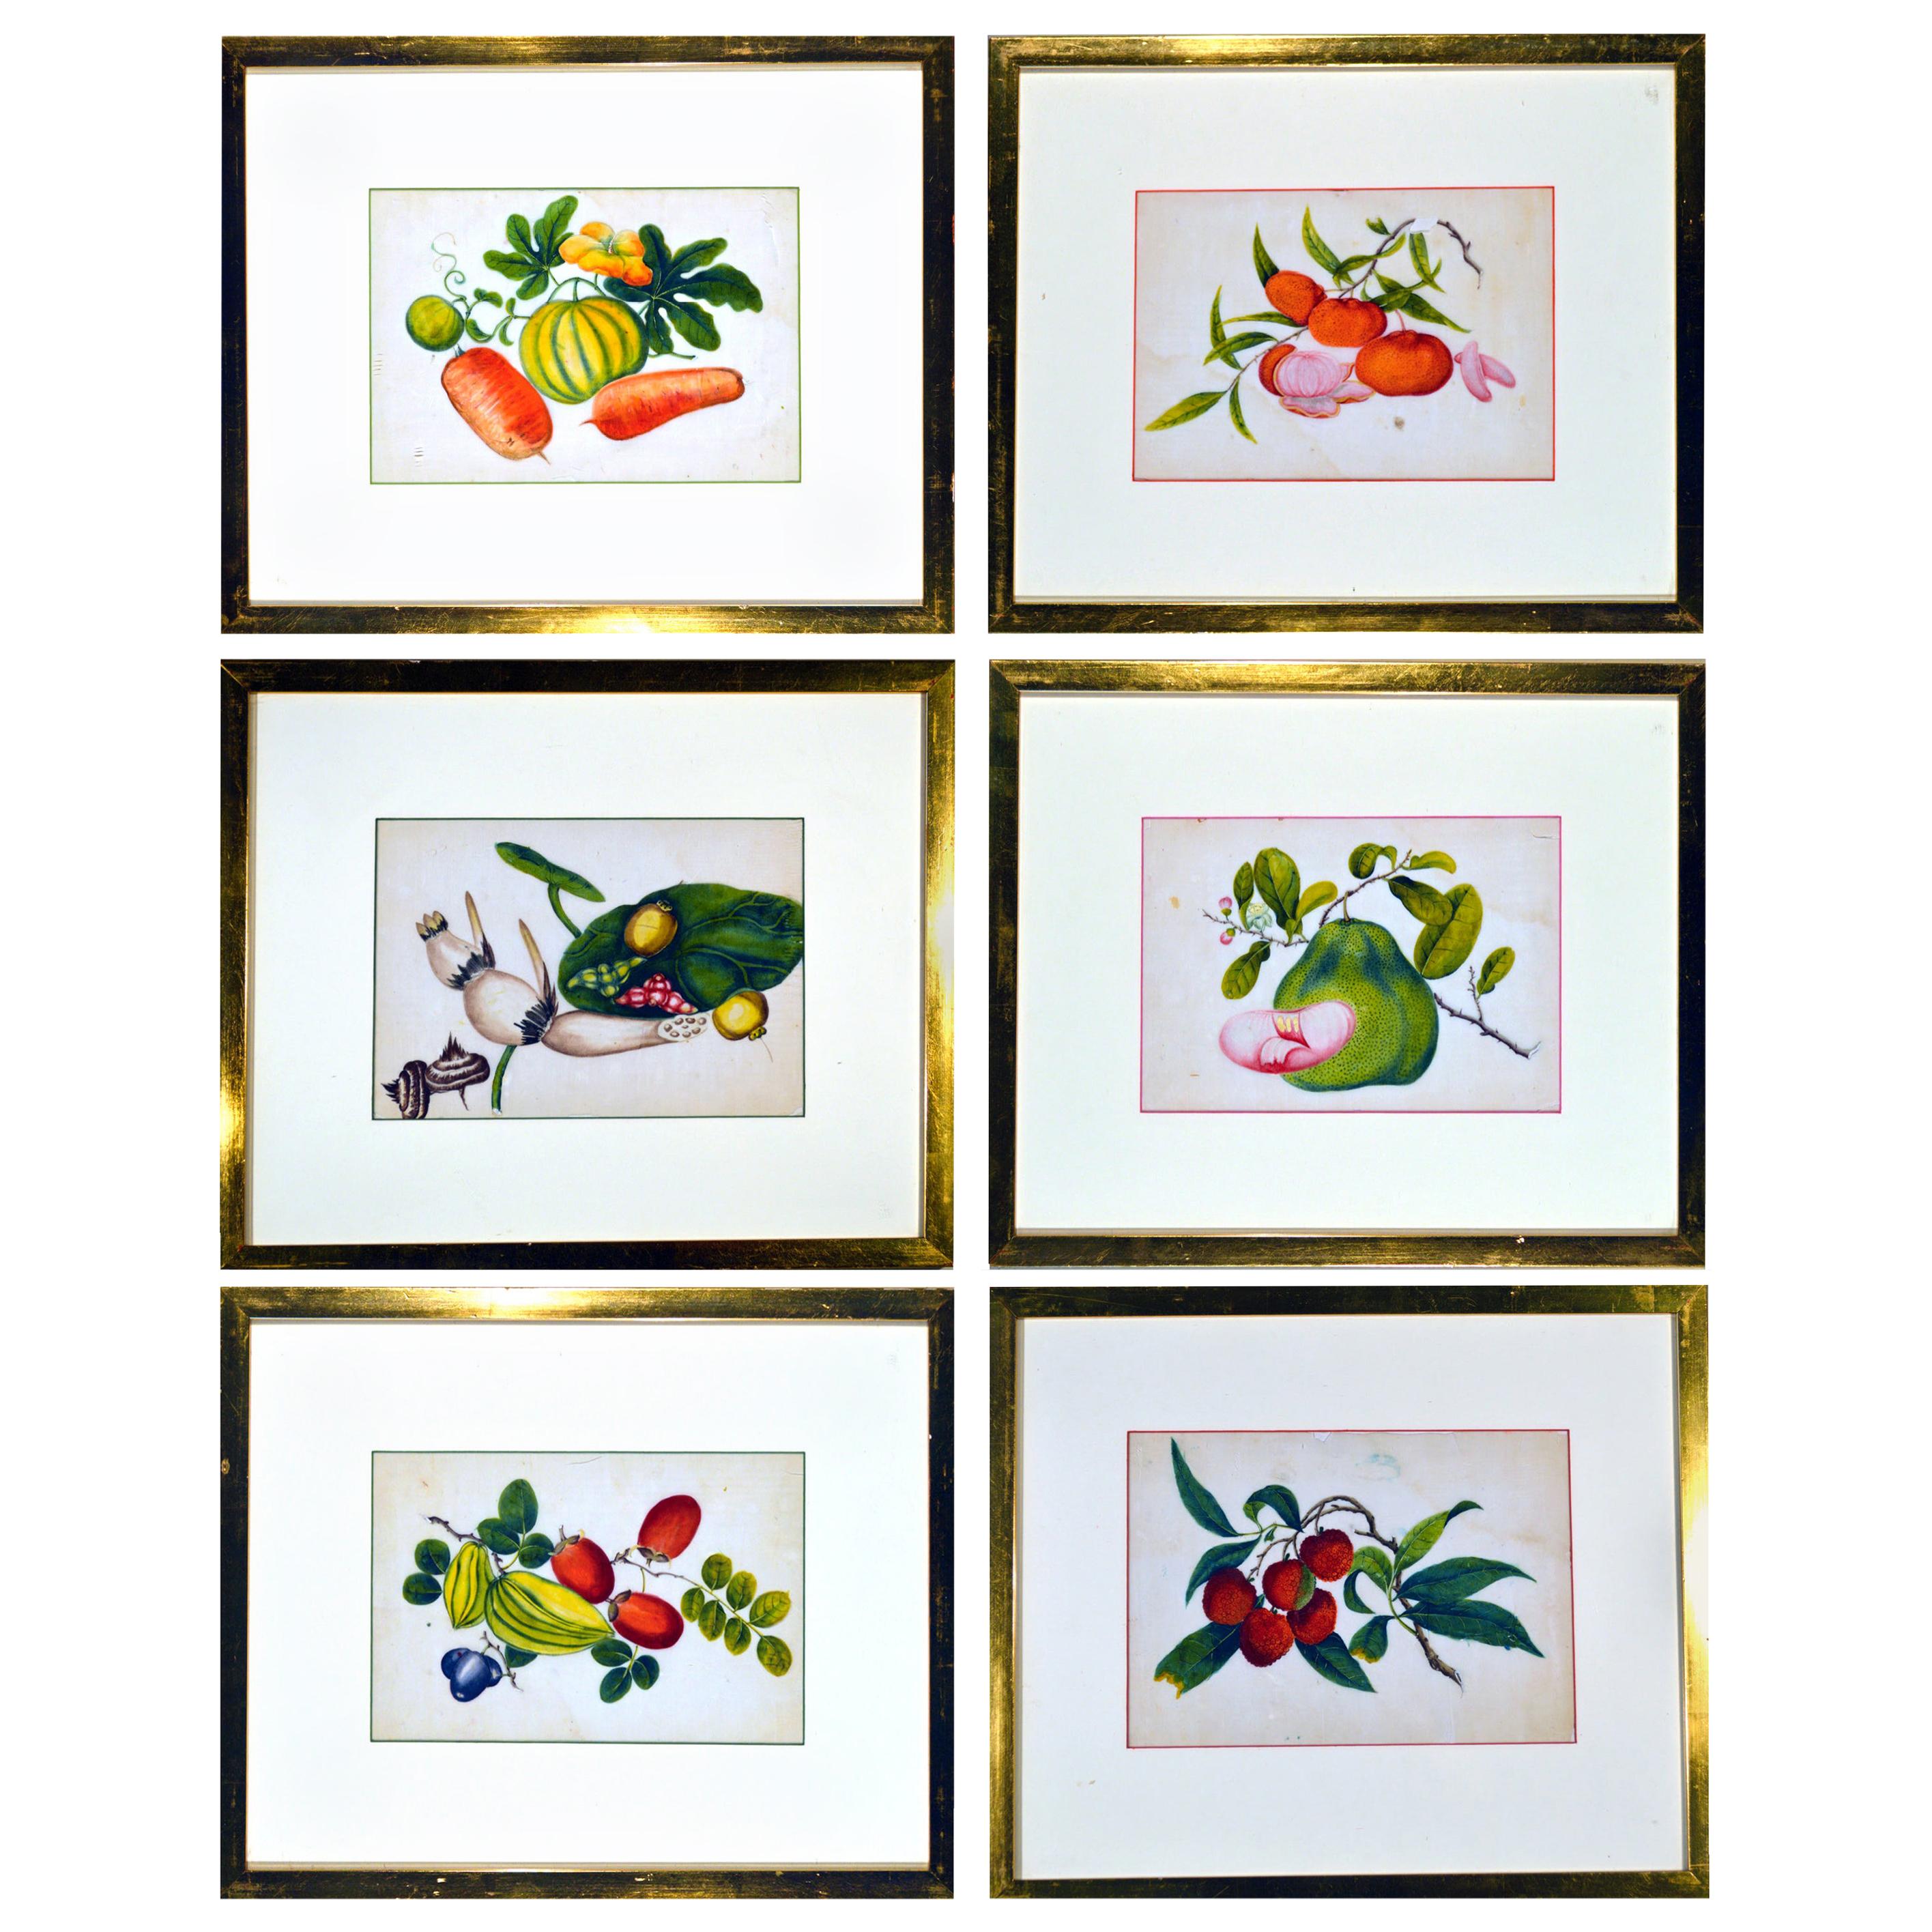 China Trade Watercolor Paintings of Vegetables, Set of Six